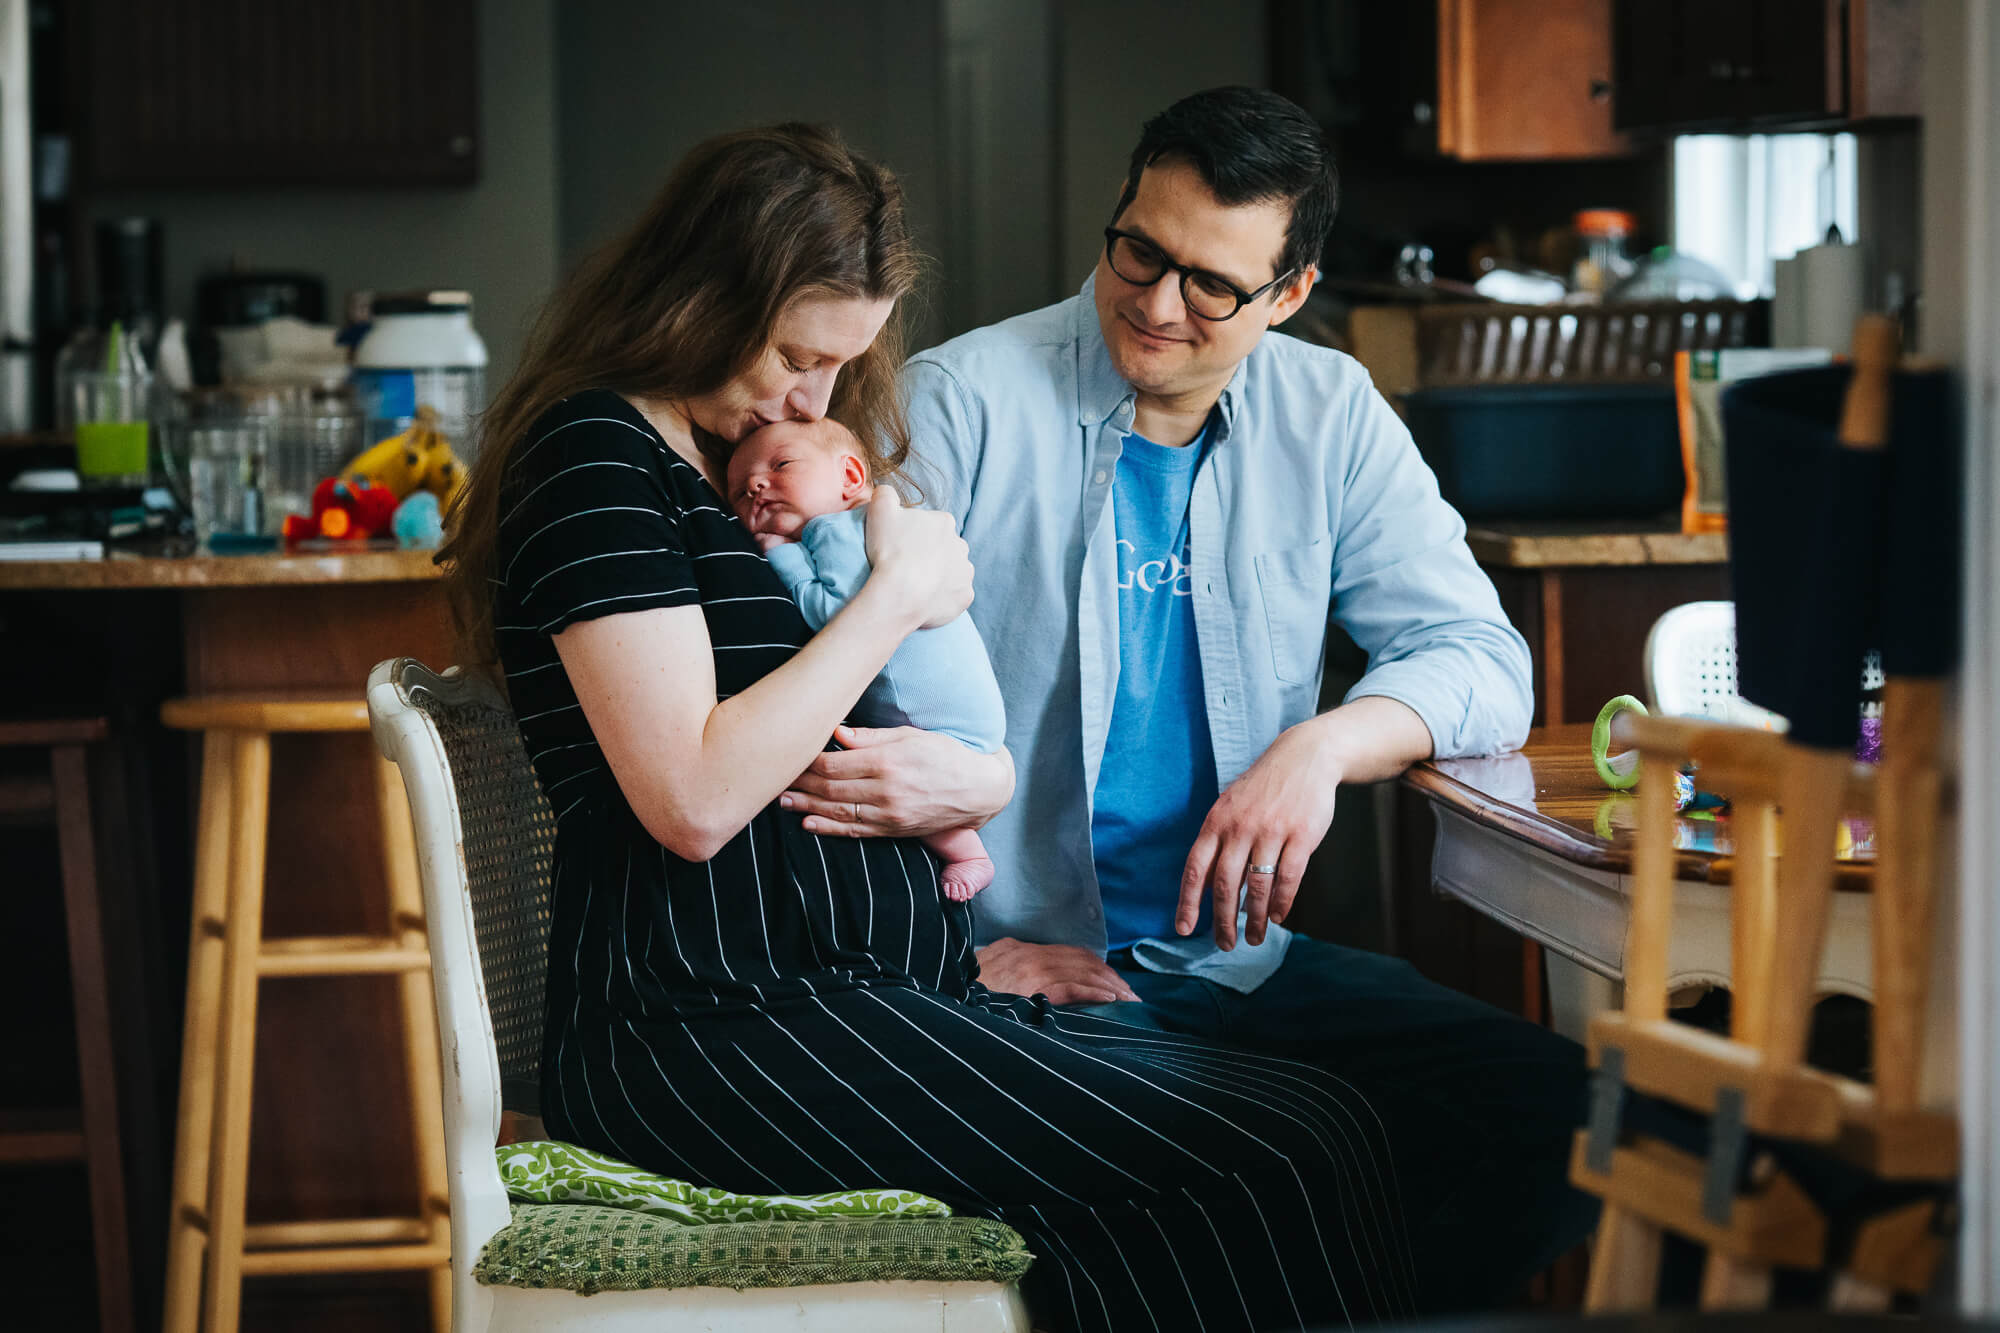 Young mother sits on a wooden chair in a dining room surrounded by bottles and breastfeeding gear. She holds her newborn son and nuzzles the top of his head, smiling. Father sits next to her and smiles while gazing at her face.